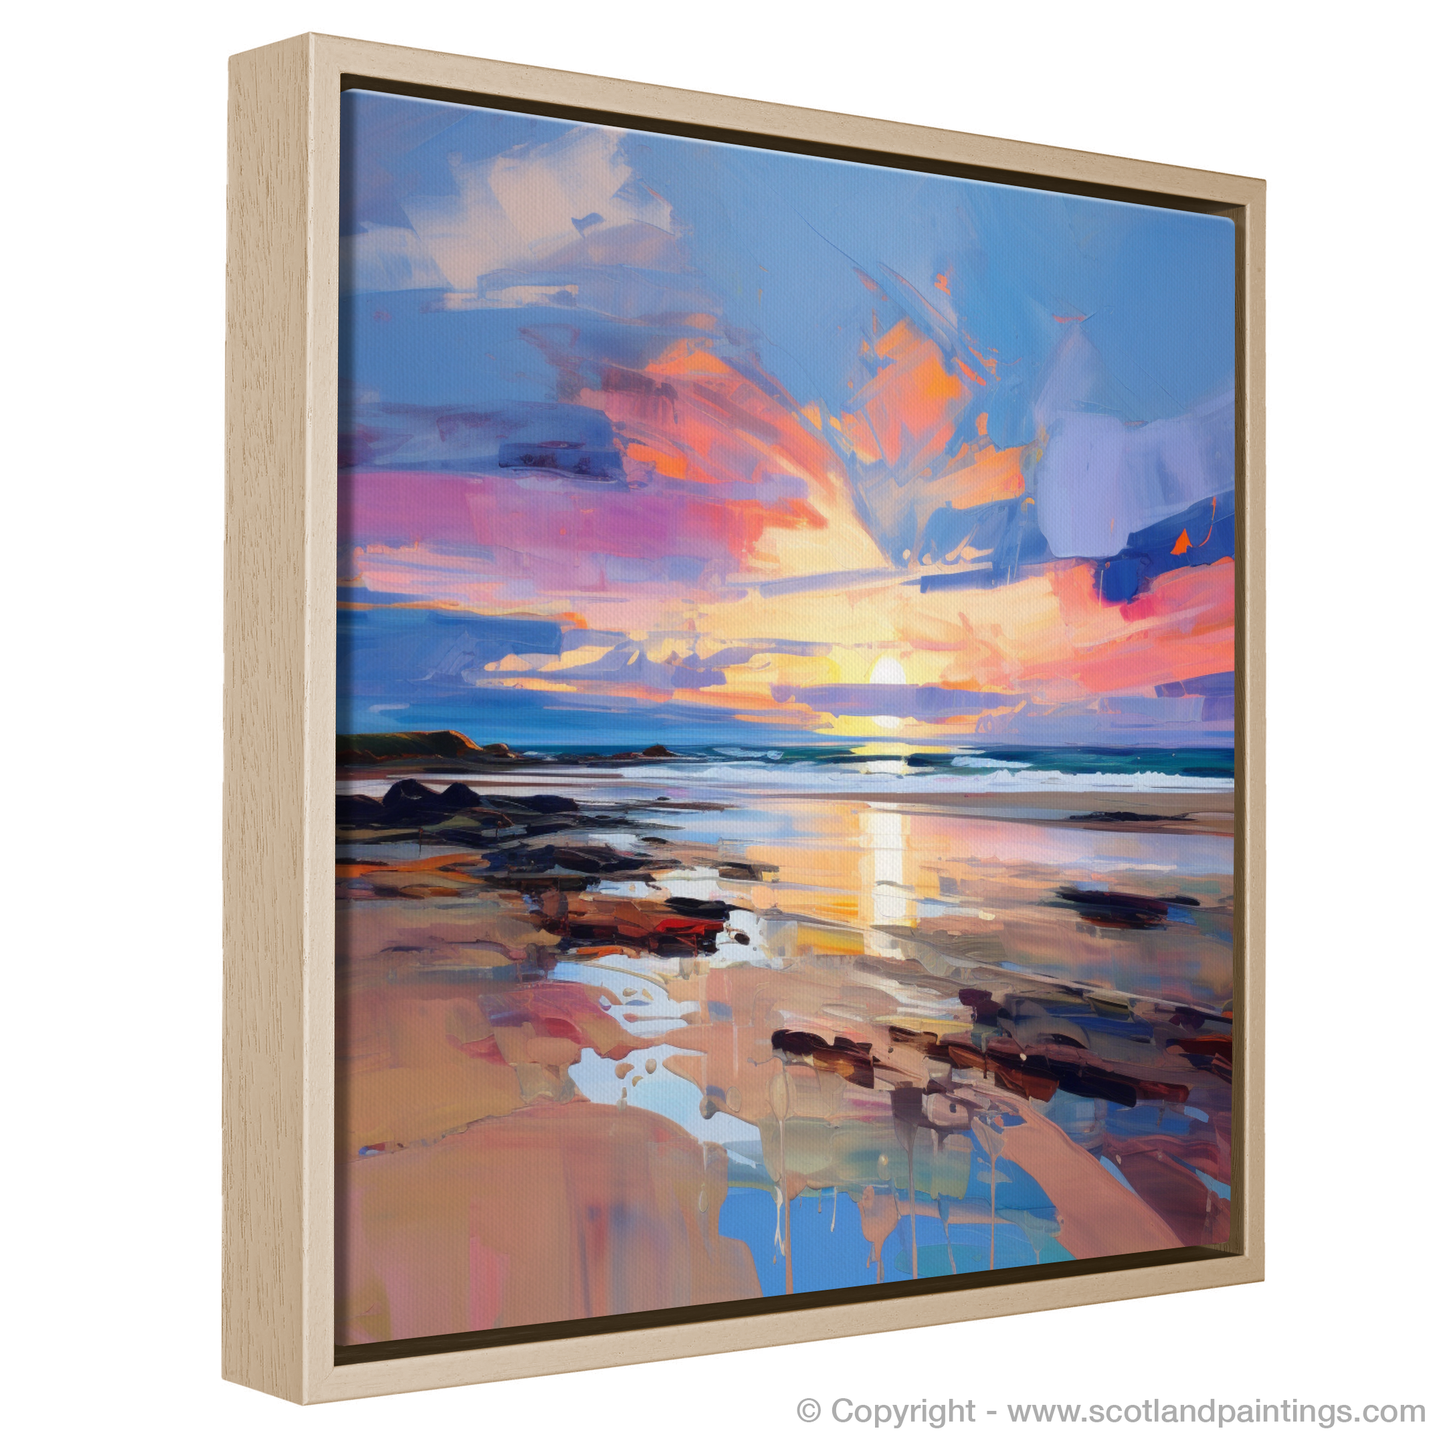 Painting and Art Print of St Cyrus Beach at sunset entitled "Fiery Sunset Embrace at St Cyrus Beach".